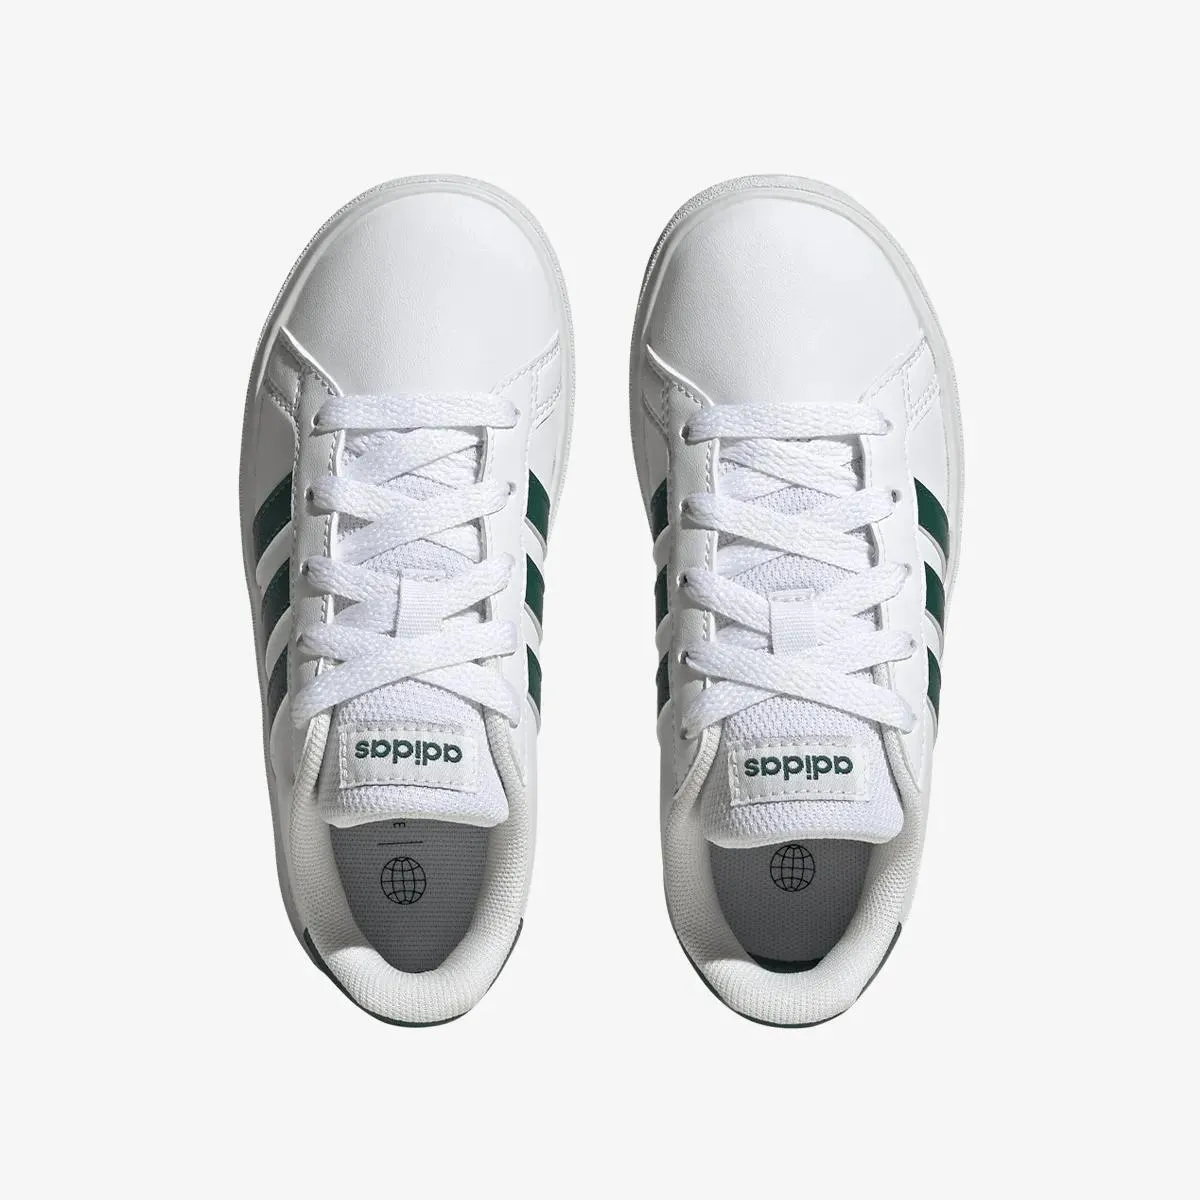 adidas Boty Grand Court Lifestyle Tennis Lace-Up 